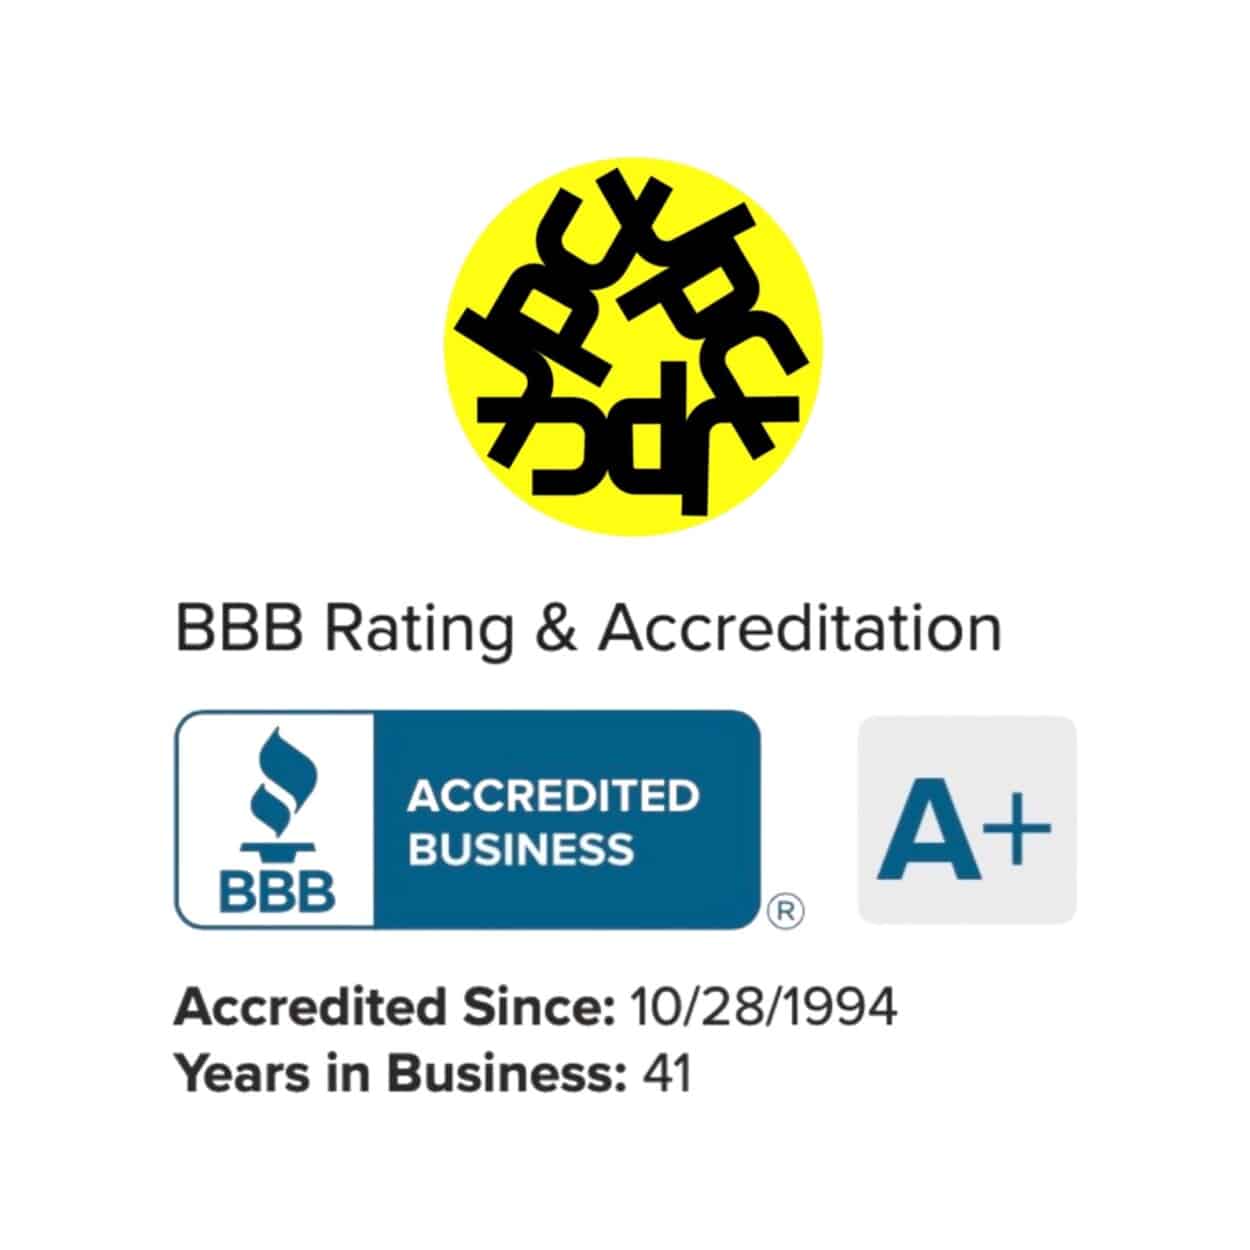 Image of the Better Business Bureau BBB rating of A+ for Joseph Philip Craig Custom Homes